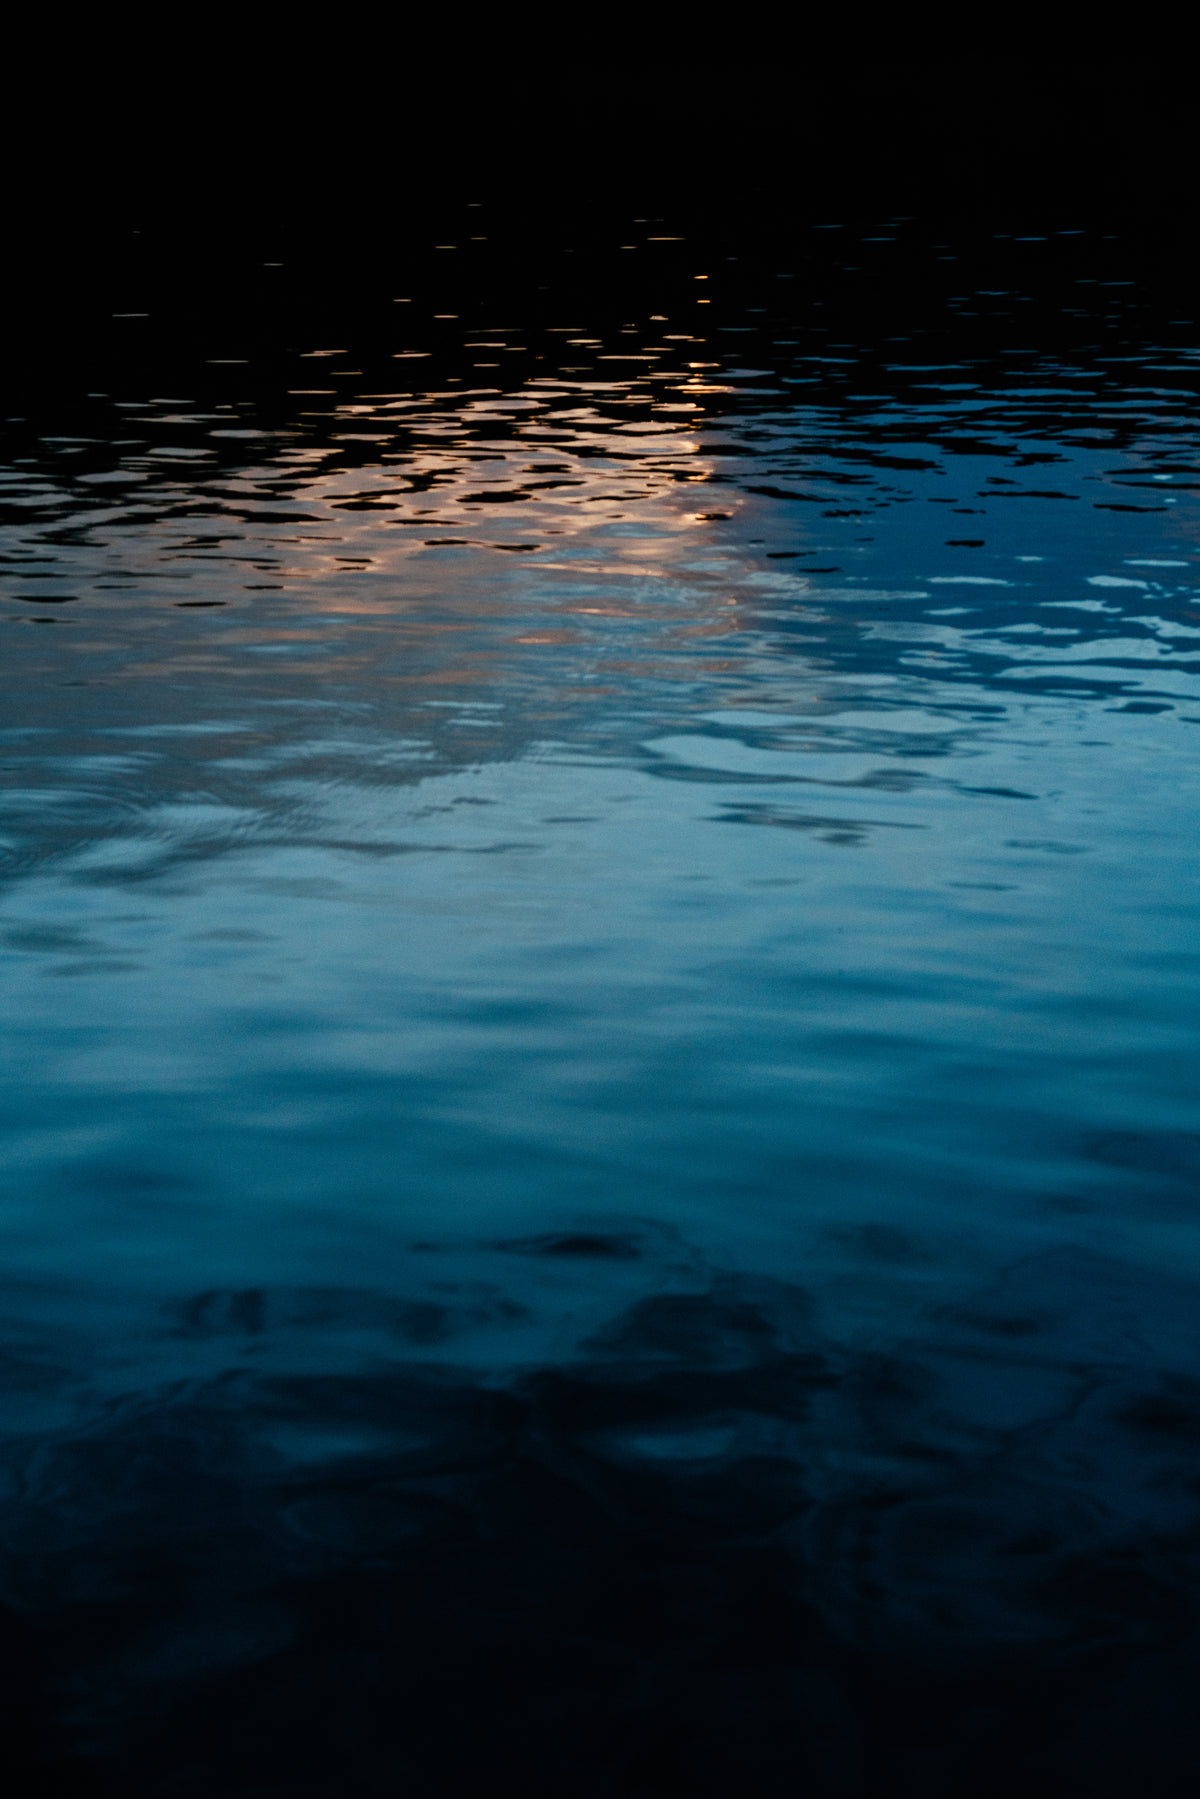 light reflects on water